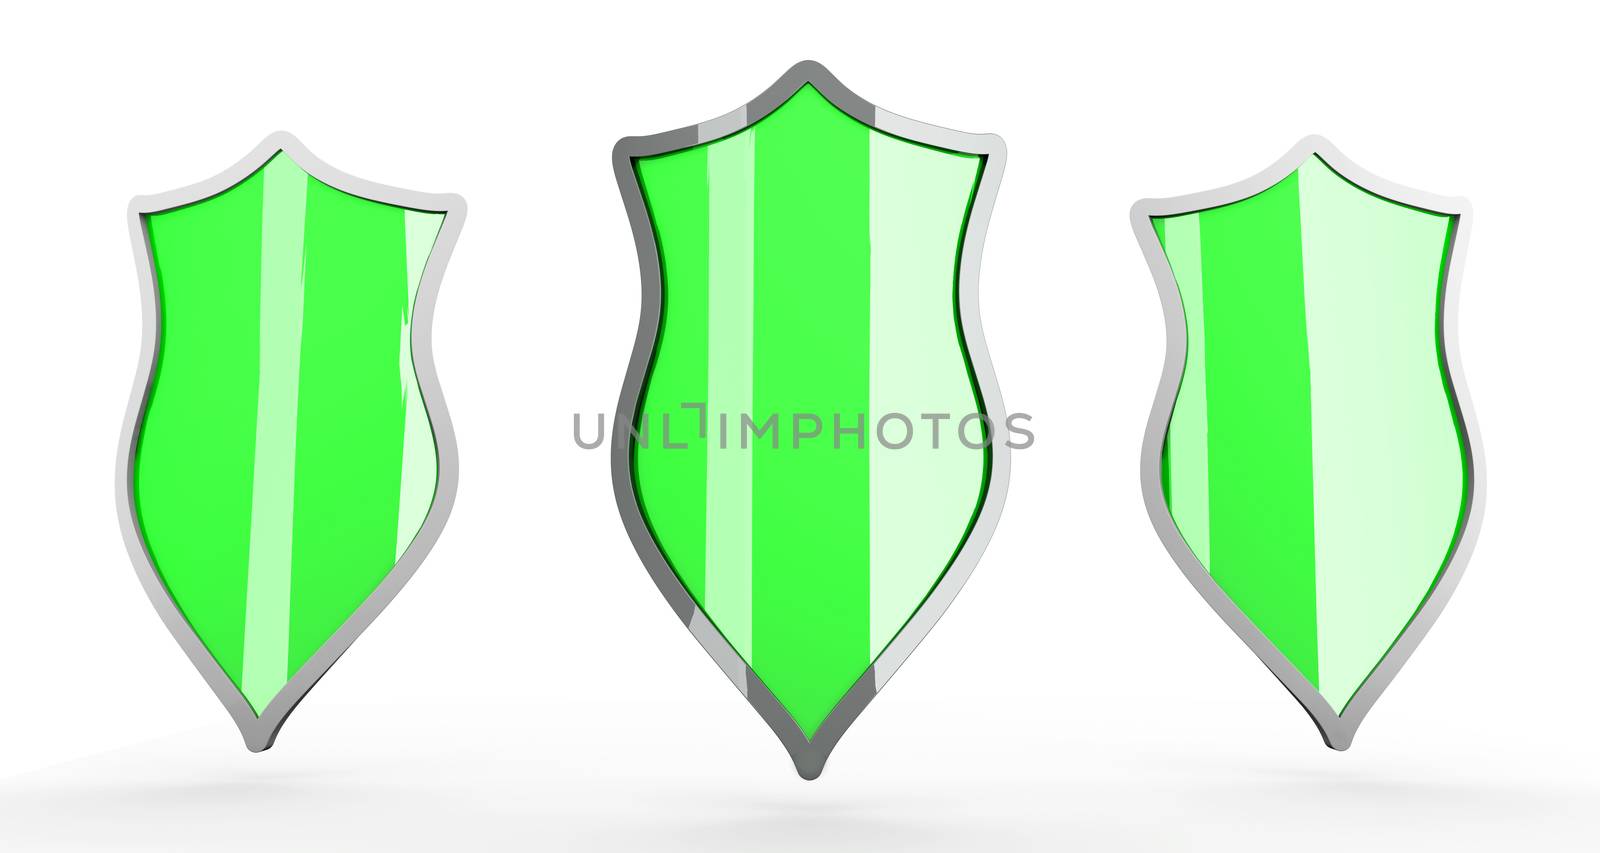 Three Shields for protection. 3D rendered Illustration. Isolated on white.